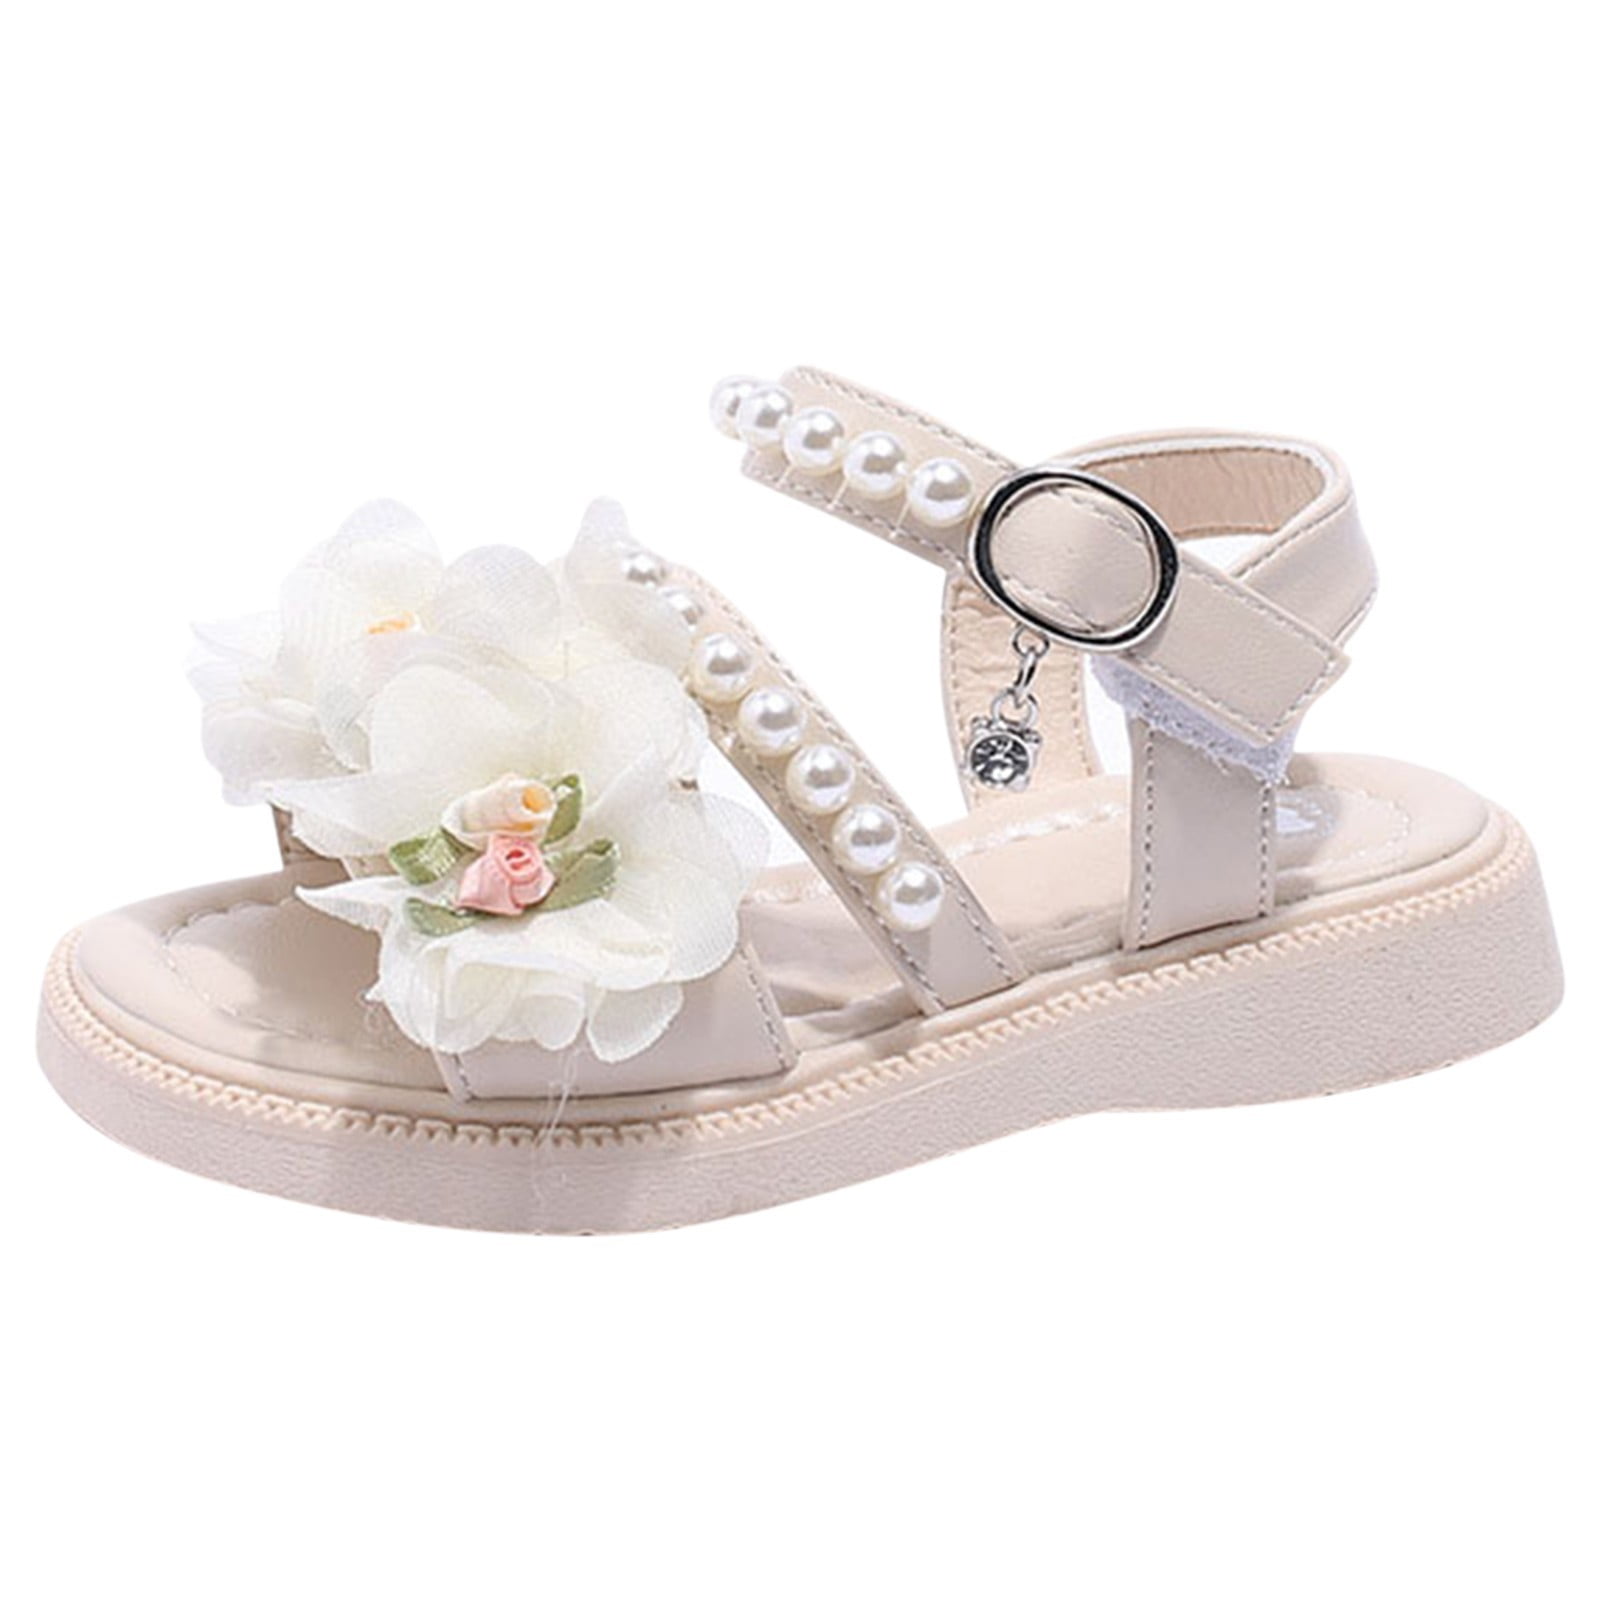 Toddler Girl Sandals Summer Pearl Flower Princess Slippers Party Non ...